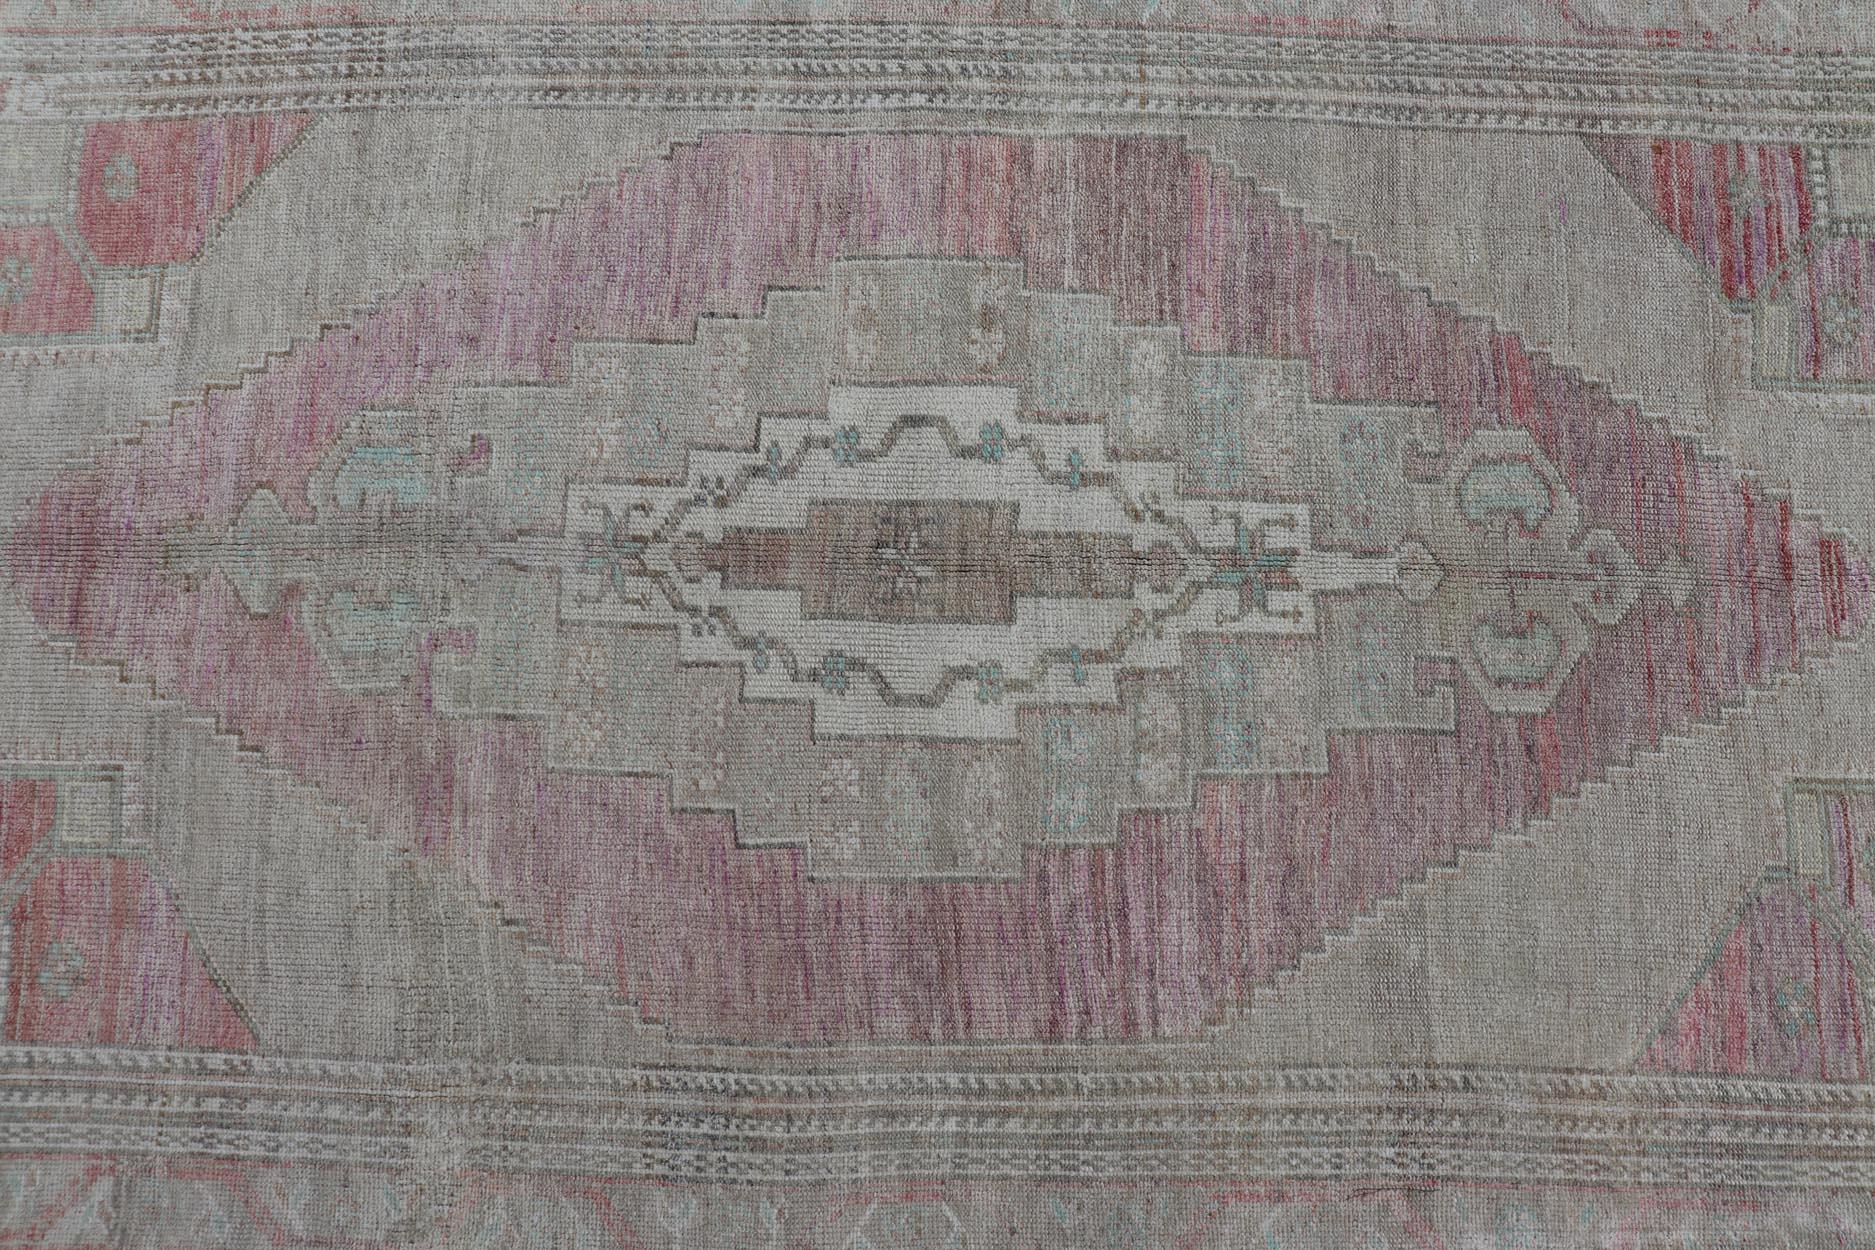 Measures: 5'7 x 9'3 

This vintage Turkish Oushak perfectly displays the craftsmanship of this time. The color palette is completely muted, with shades of taupe, camel, pink, blue, teal, magenta, and gold. The border displays a classic medallion